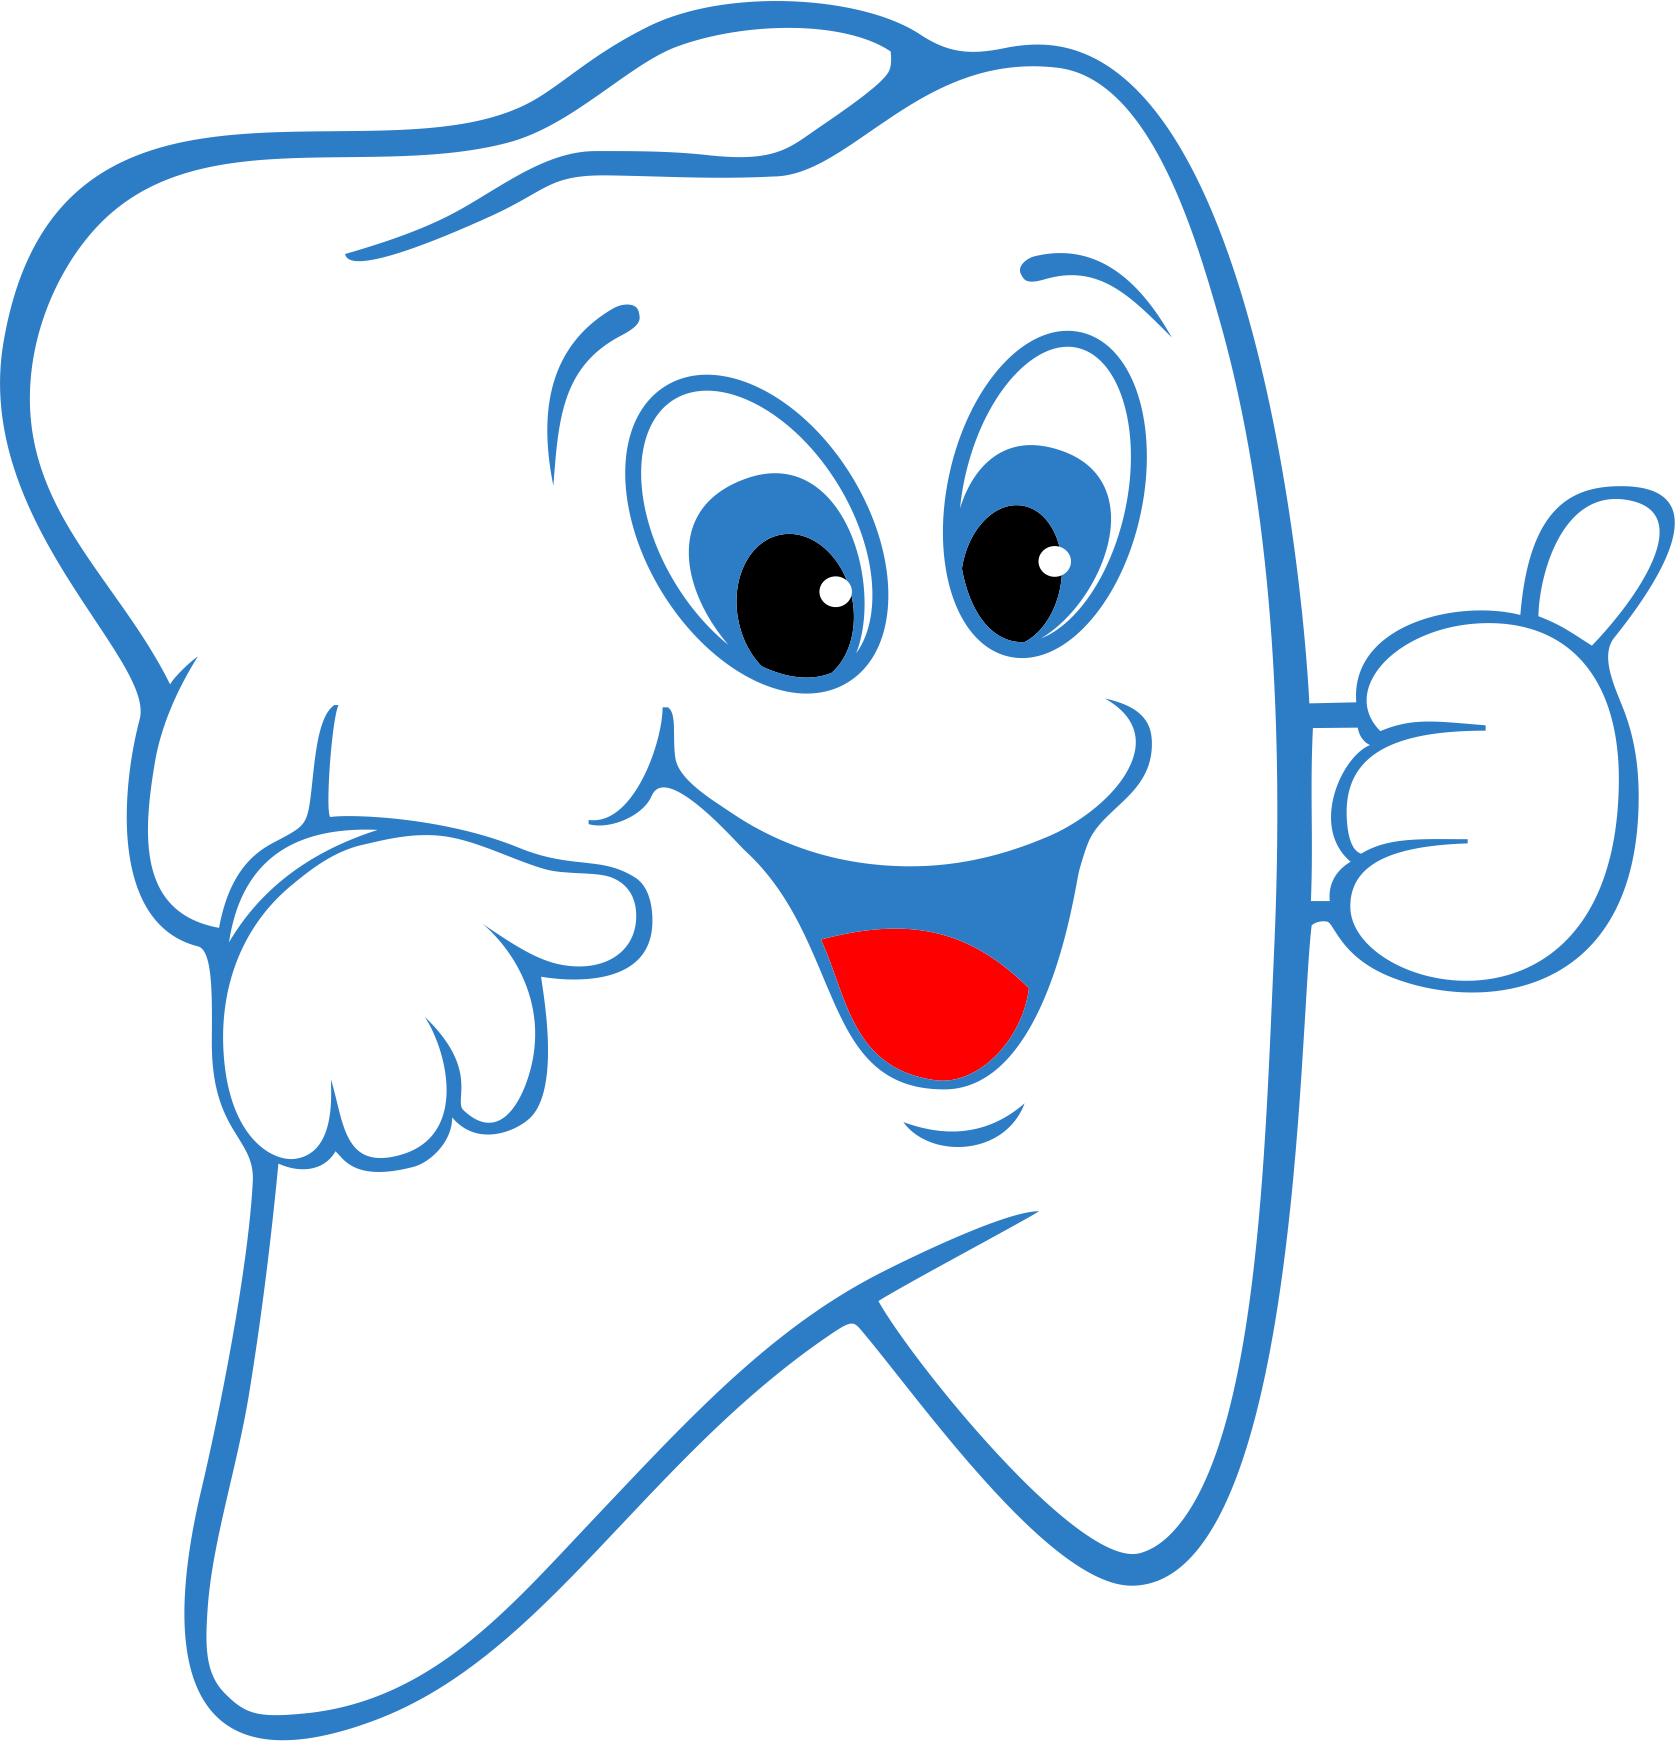 Tooth cartoon images clipart